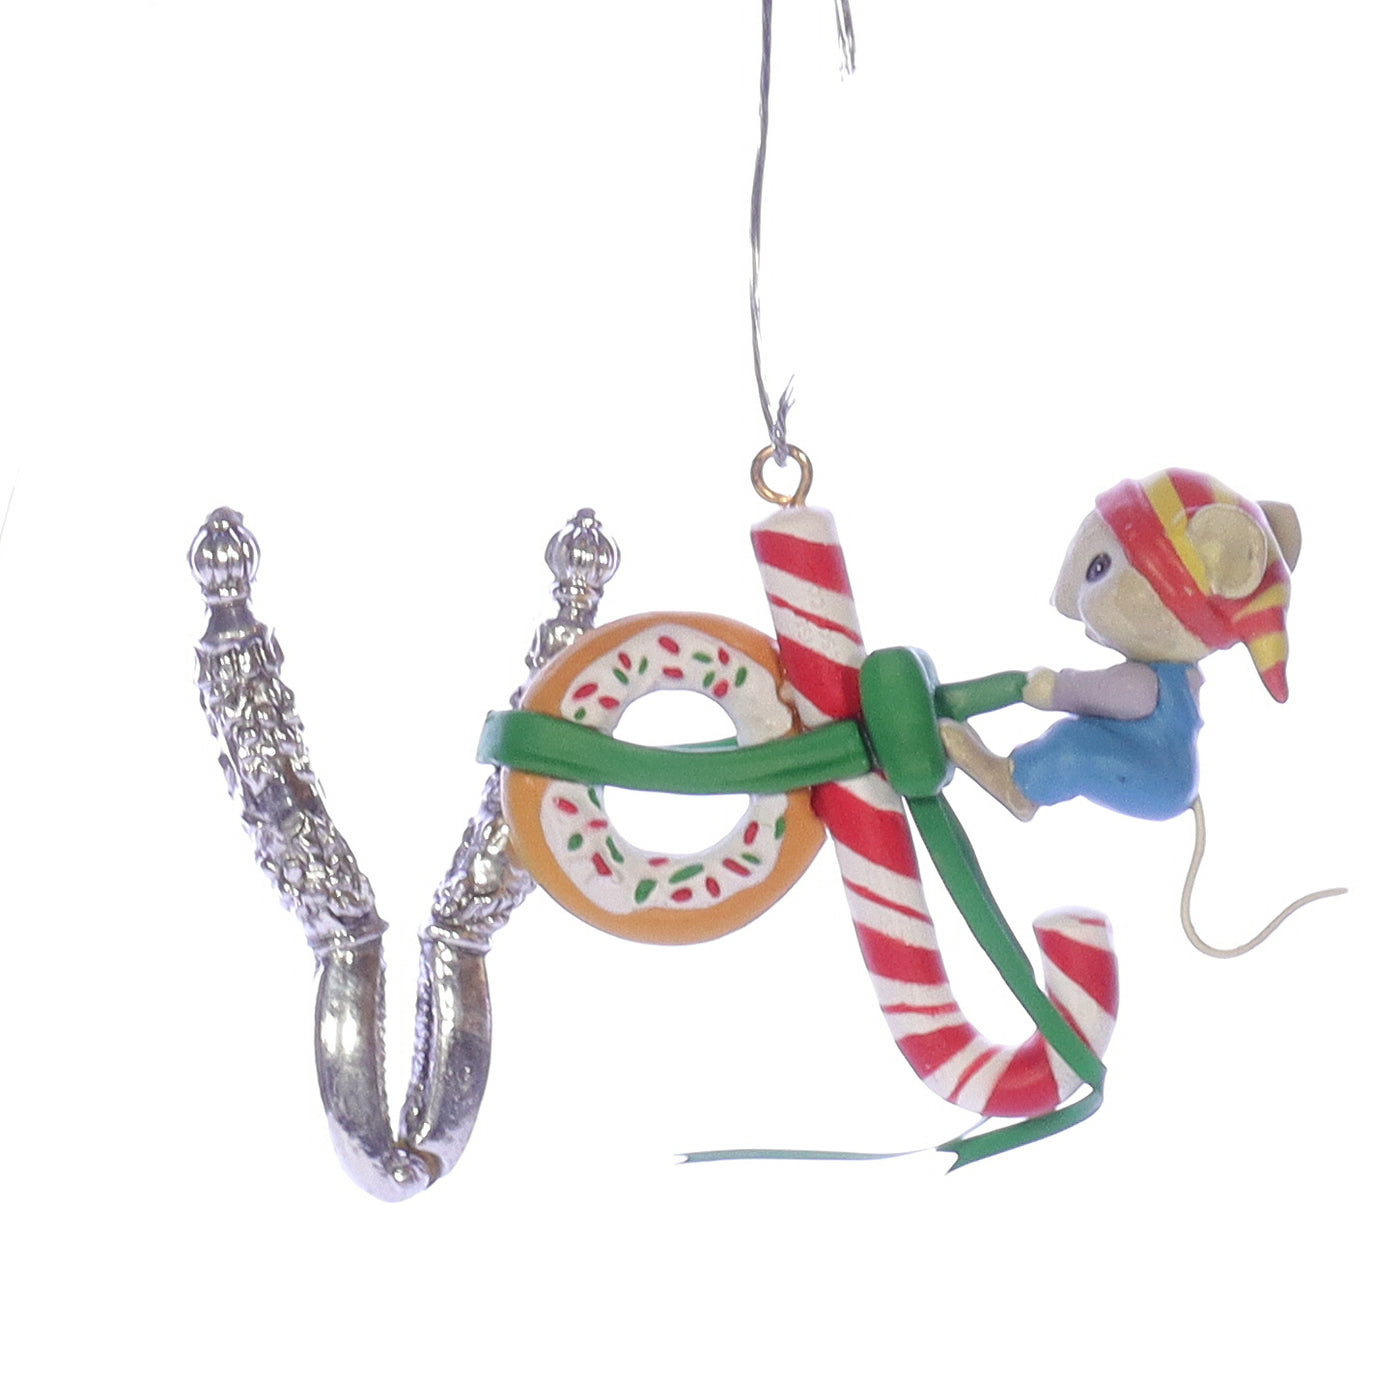 Enesco_Treasury_of_Christmas_Ornaments_830488_Tie-dings_of_Joy_Mouse_Ornament_1991 Front View